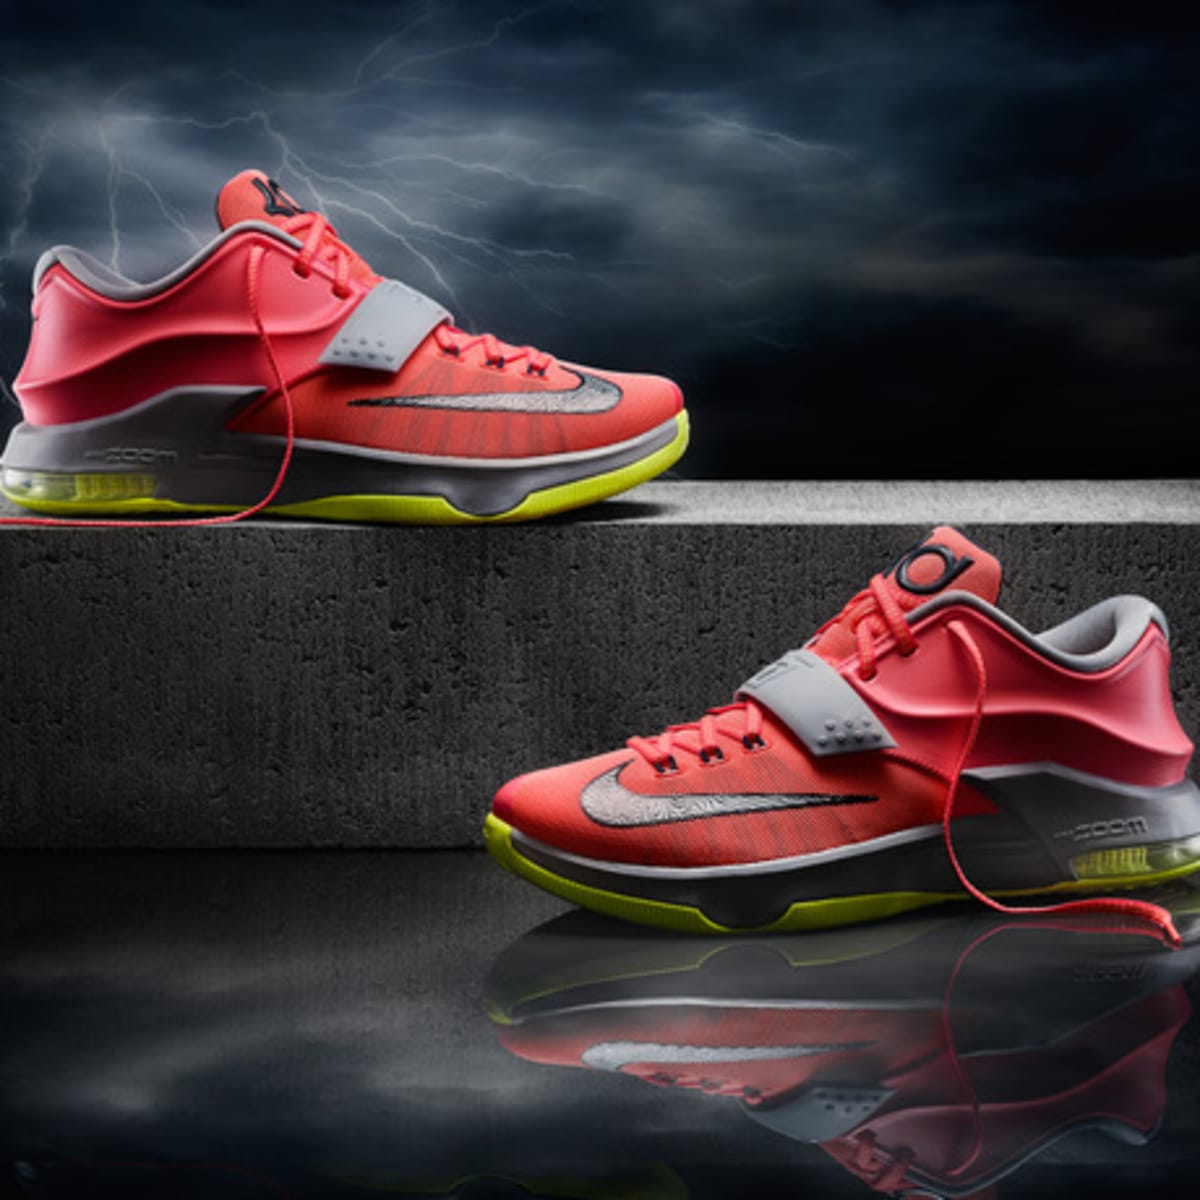 kd shoes with strap